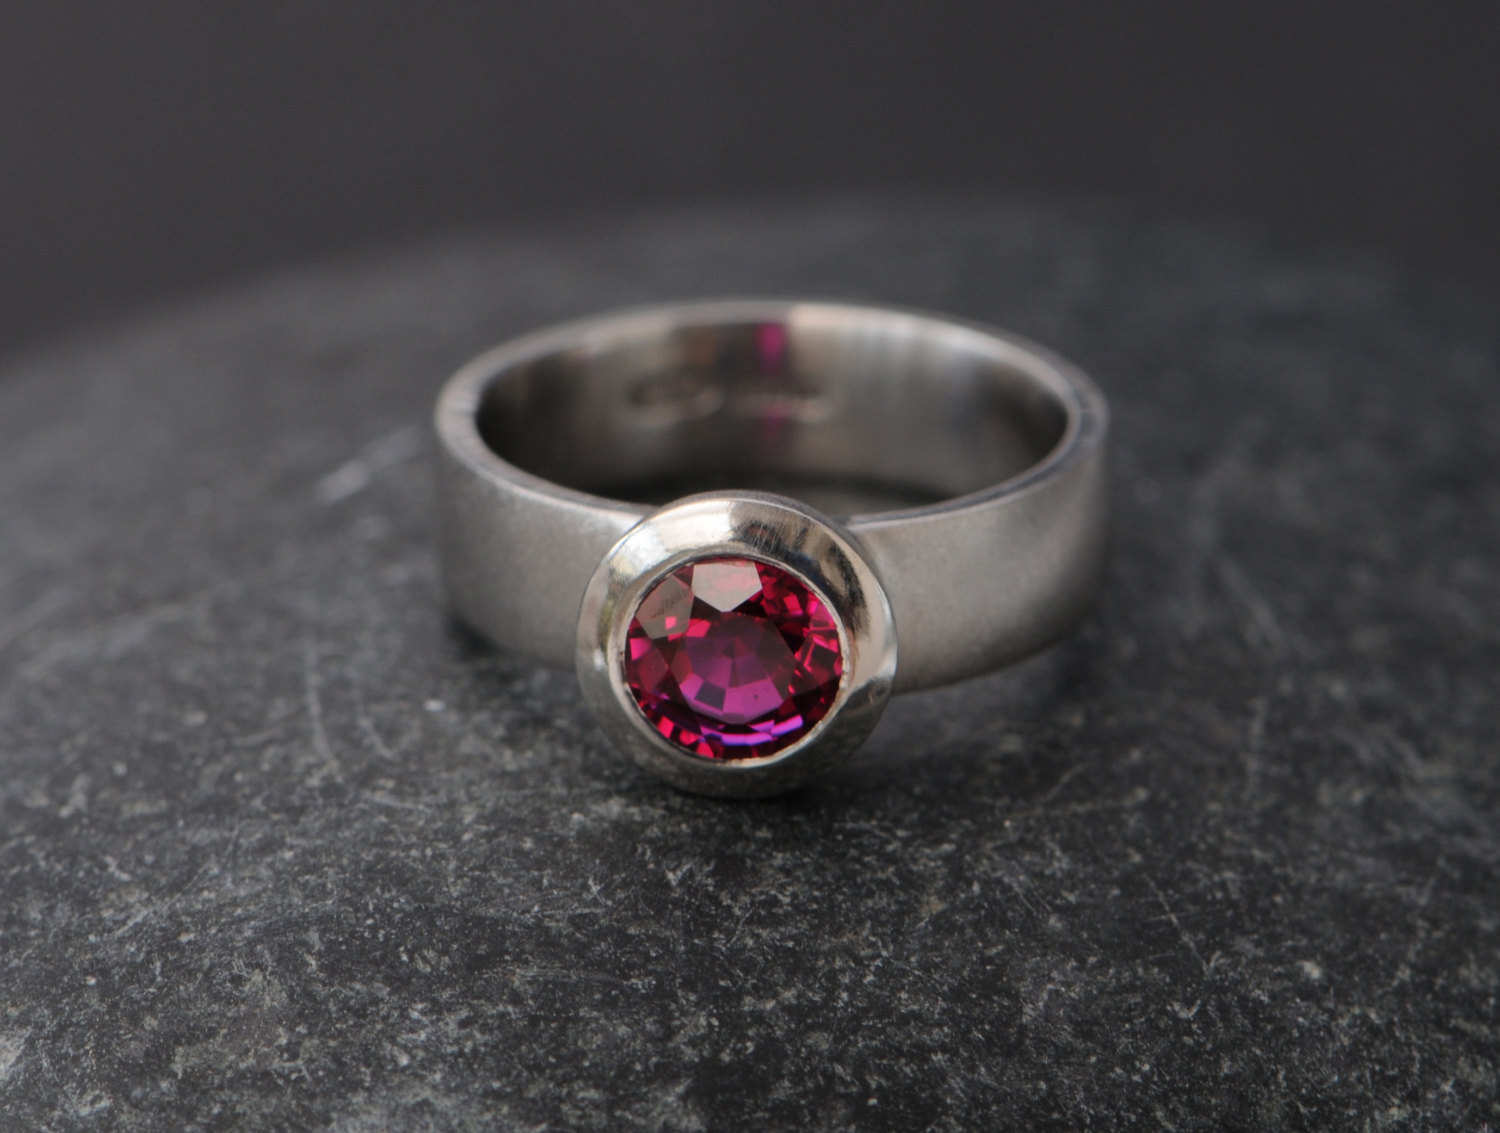 Synthetic ruby set in platinum ring.